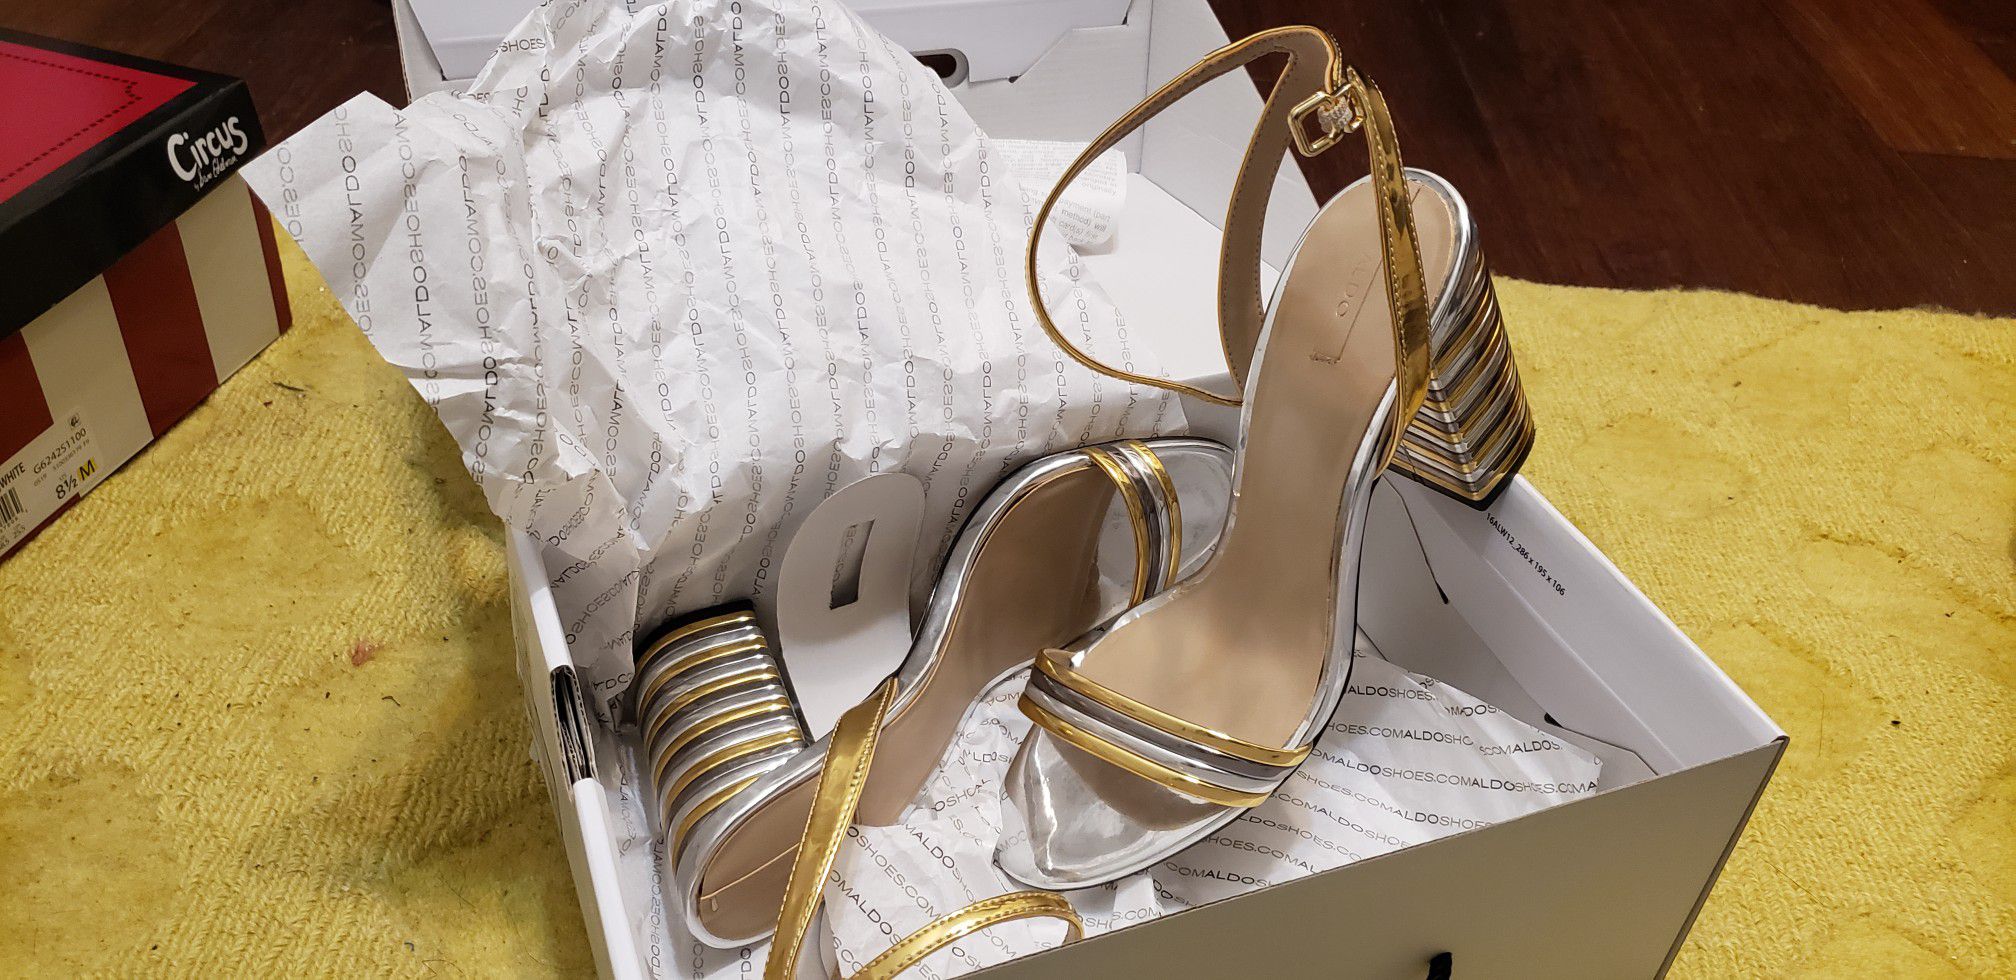 Aldo Size 8 Gold and Silver Block Heel Sandals